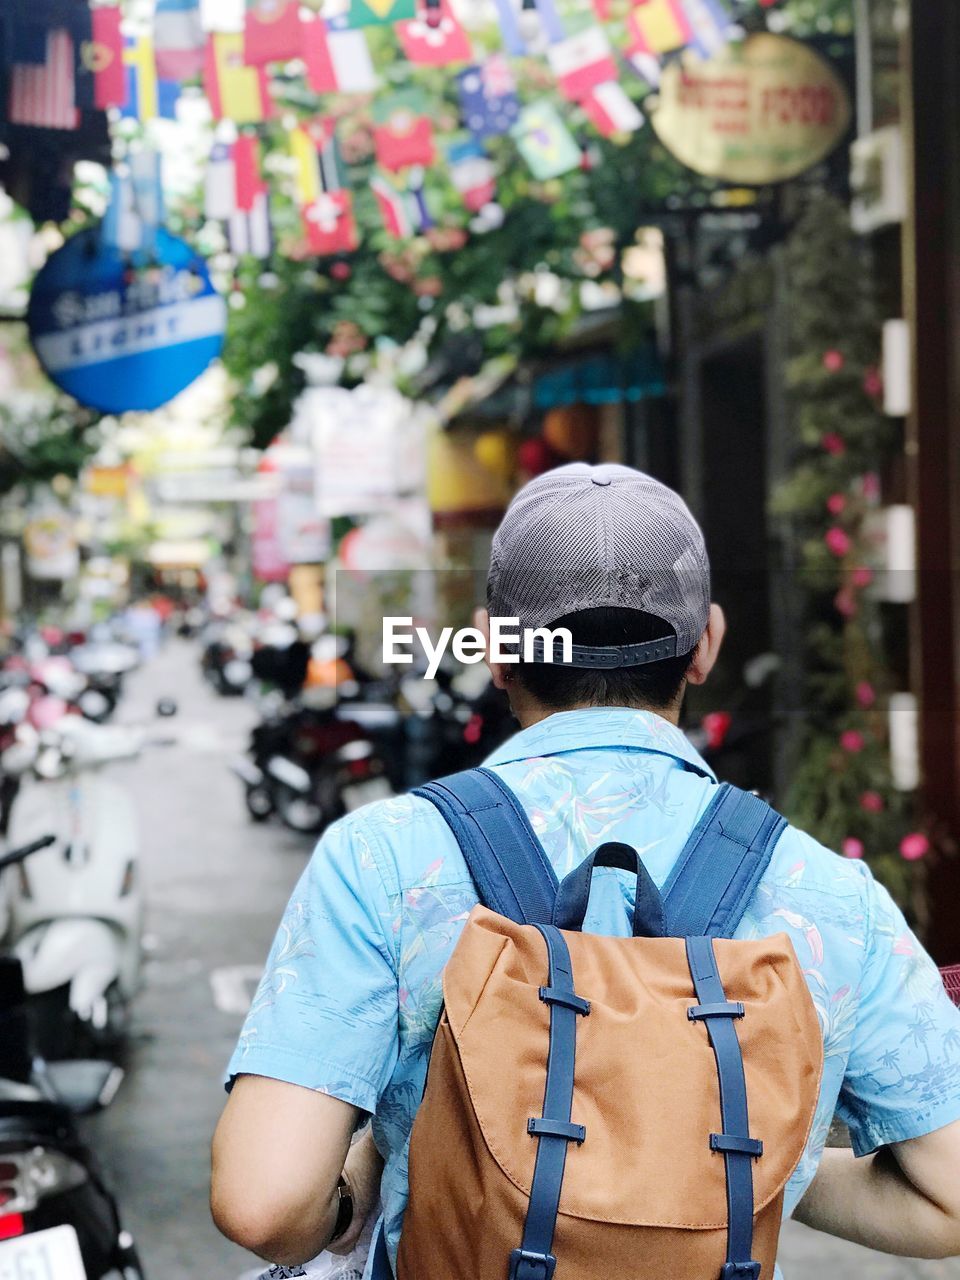 The man bag packer is looking for accommodation in vietnam. rear view of man standing in city